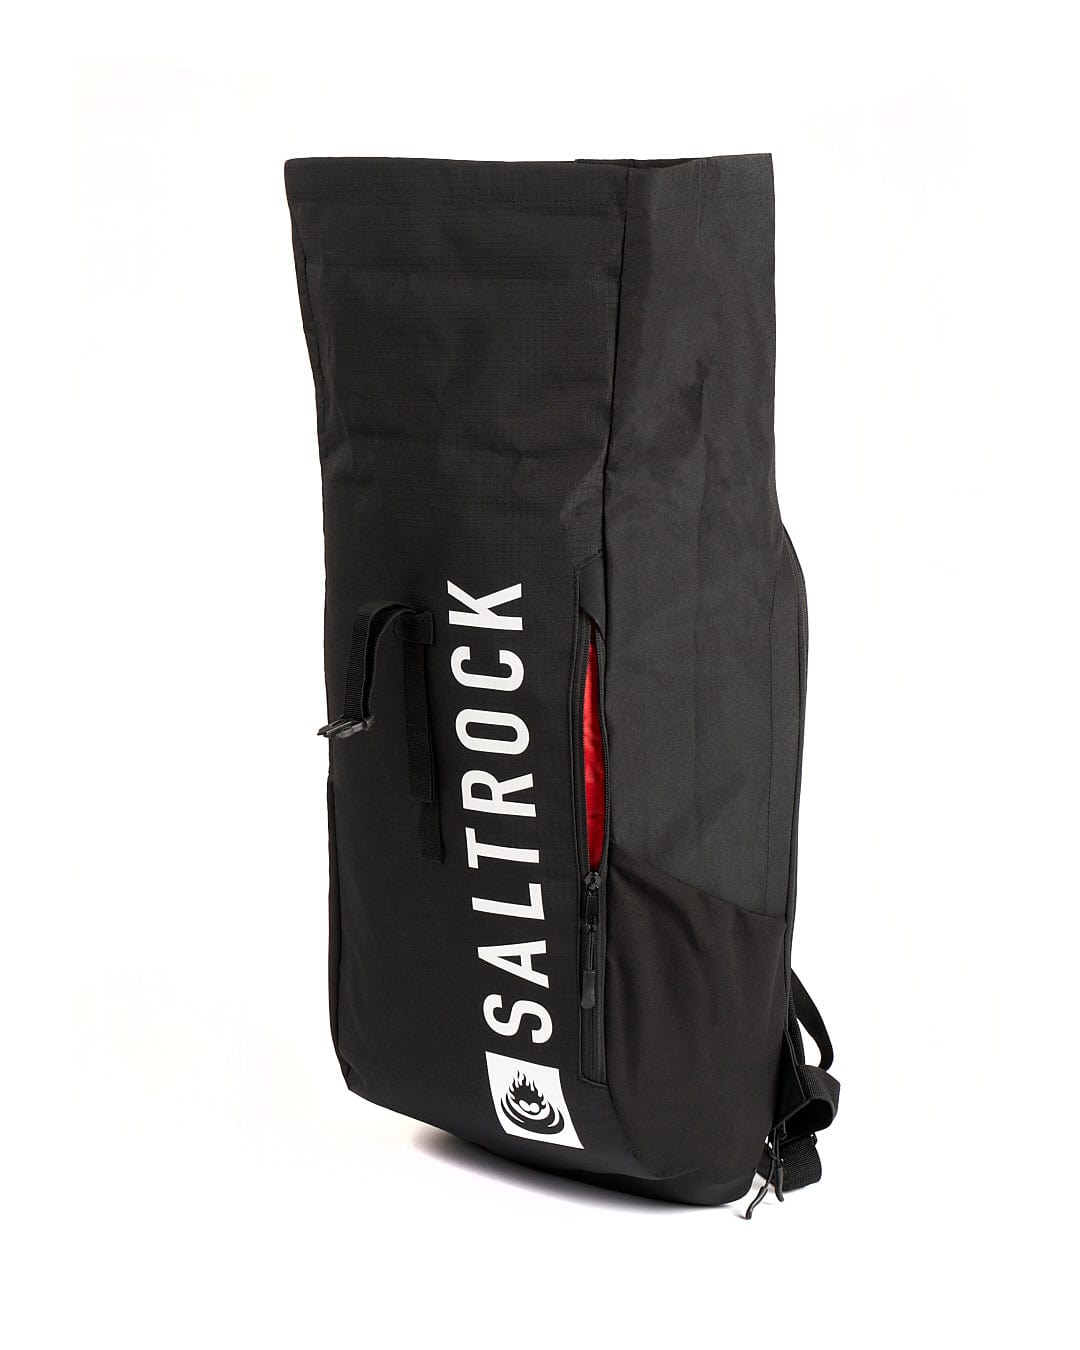 A Streamline backpack in black with the brand name Saltrock on it.